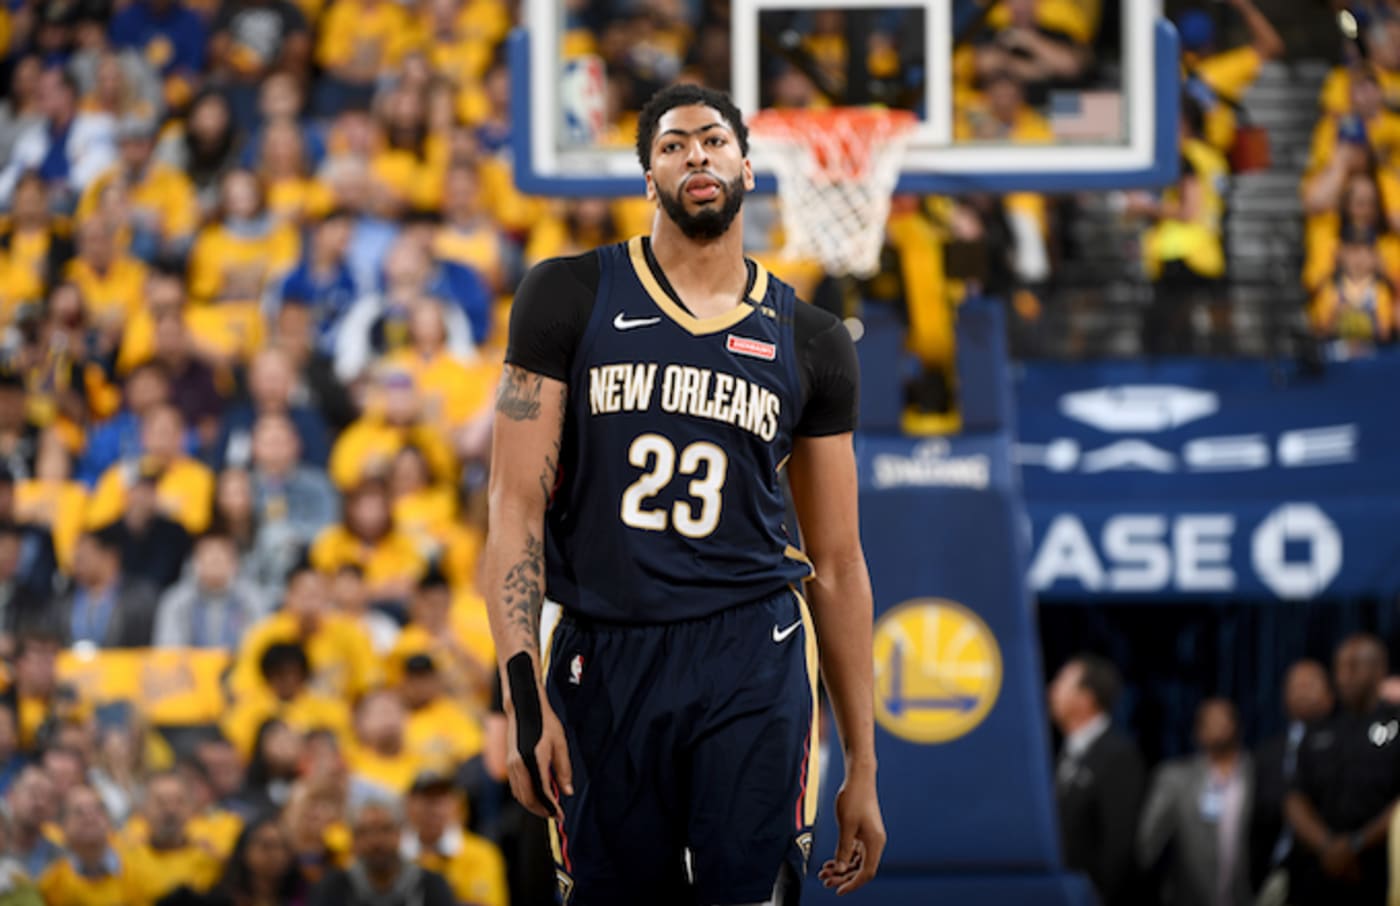 Anthony Davis #23 of the New Orleans Pelicans.